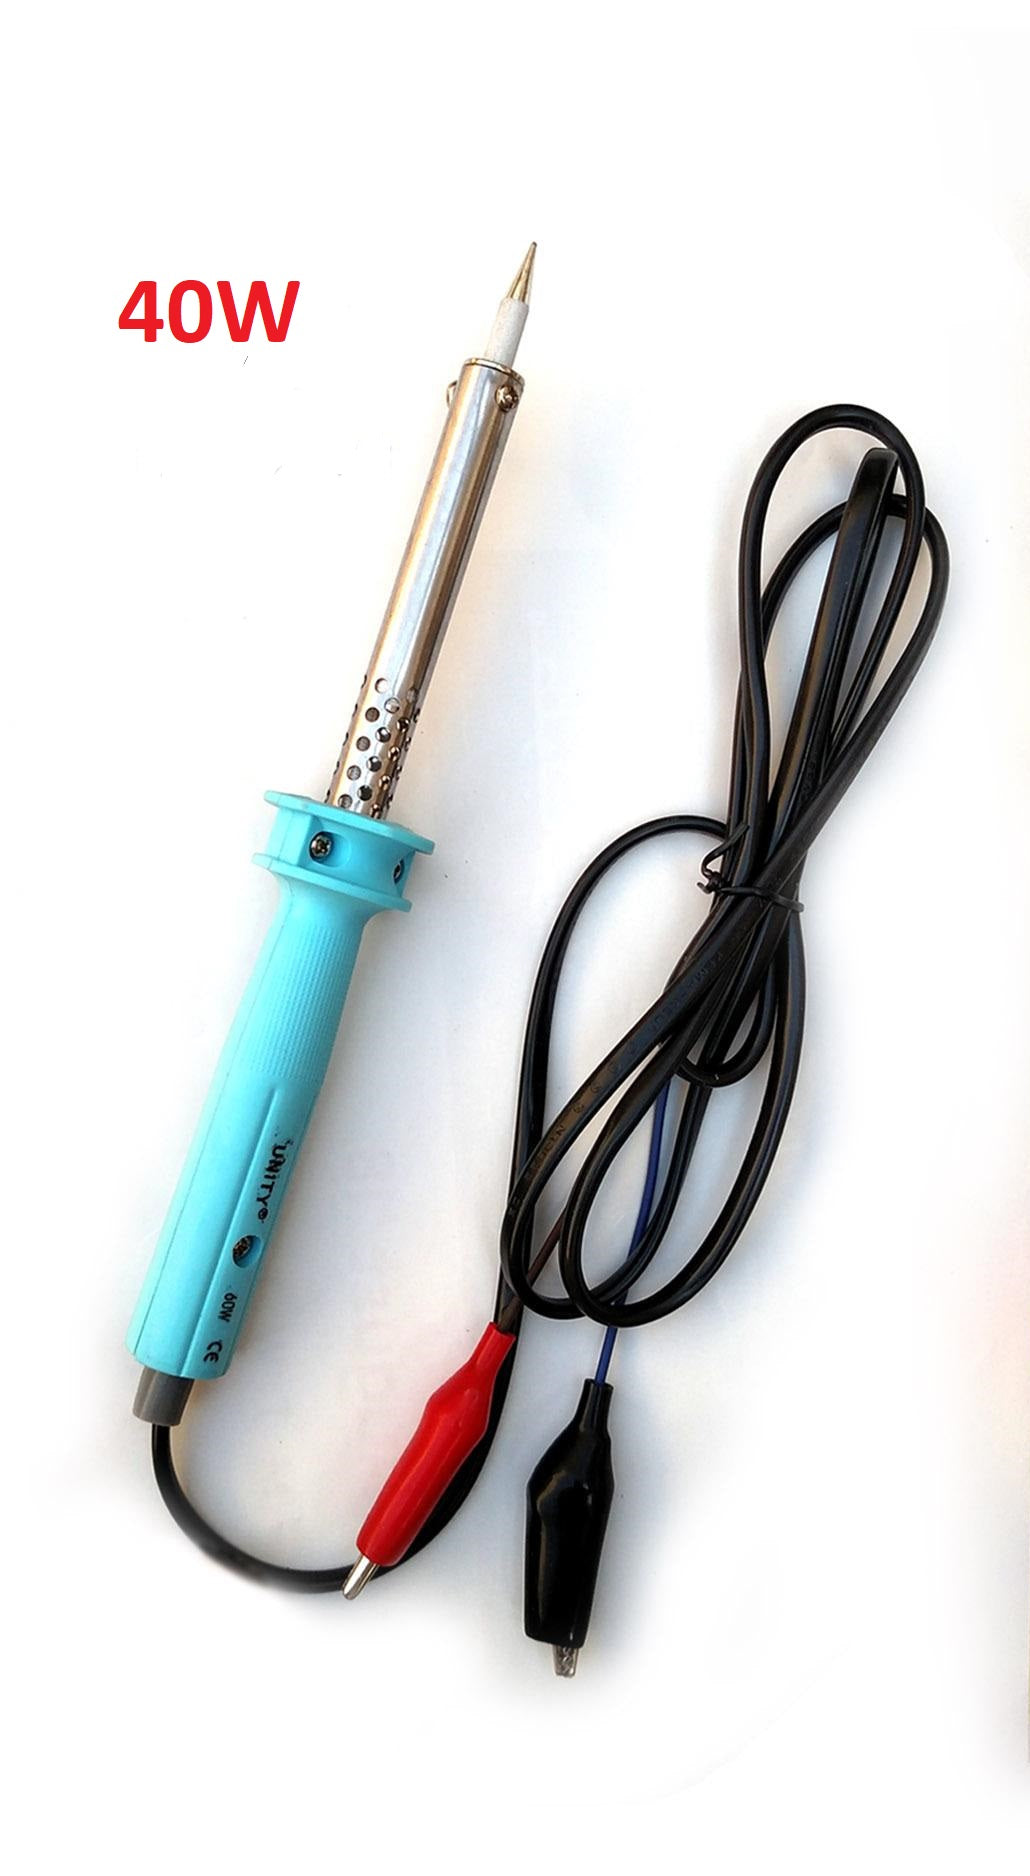 40W DC Soldering Iron - Ideal for Solar-Powered and Off-Grid Areas